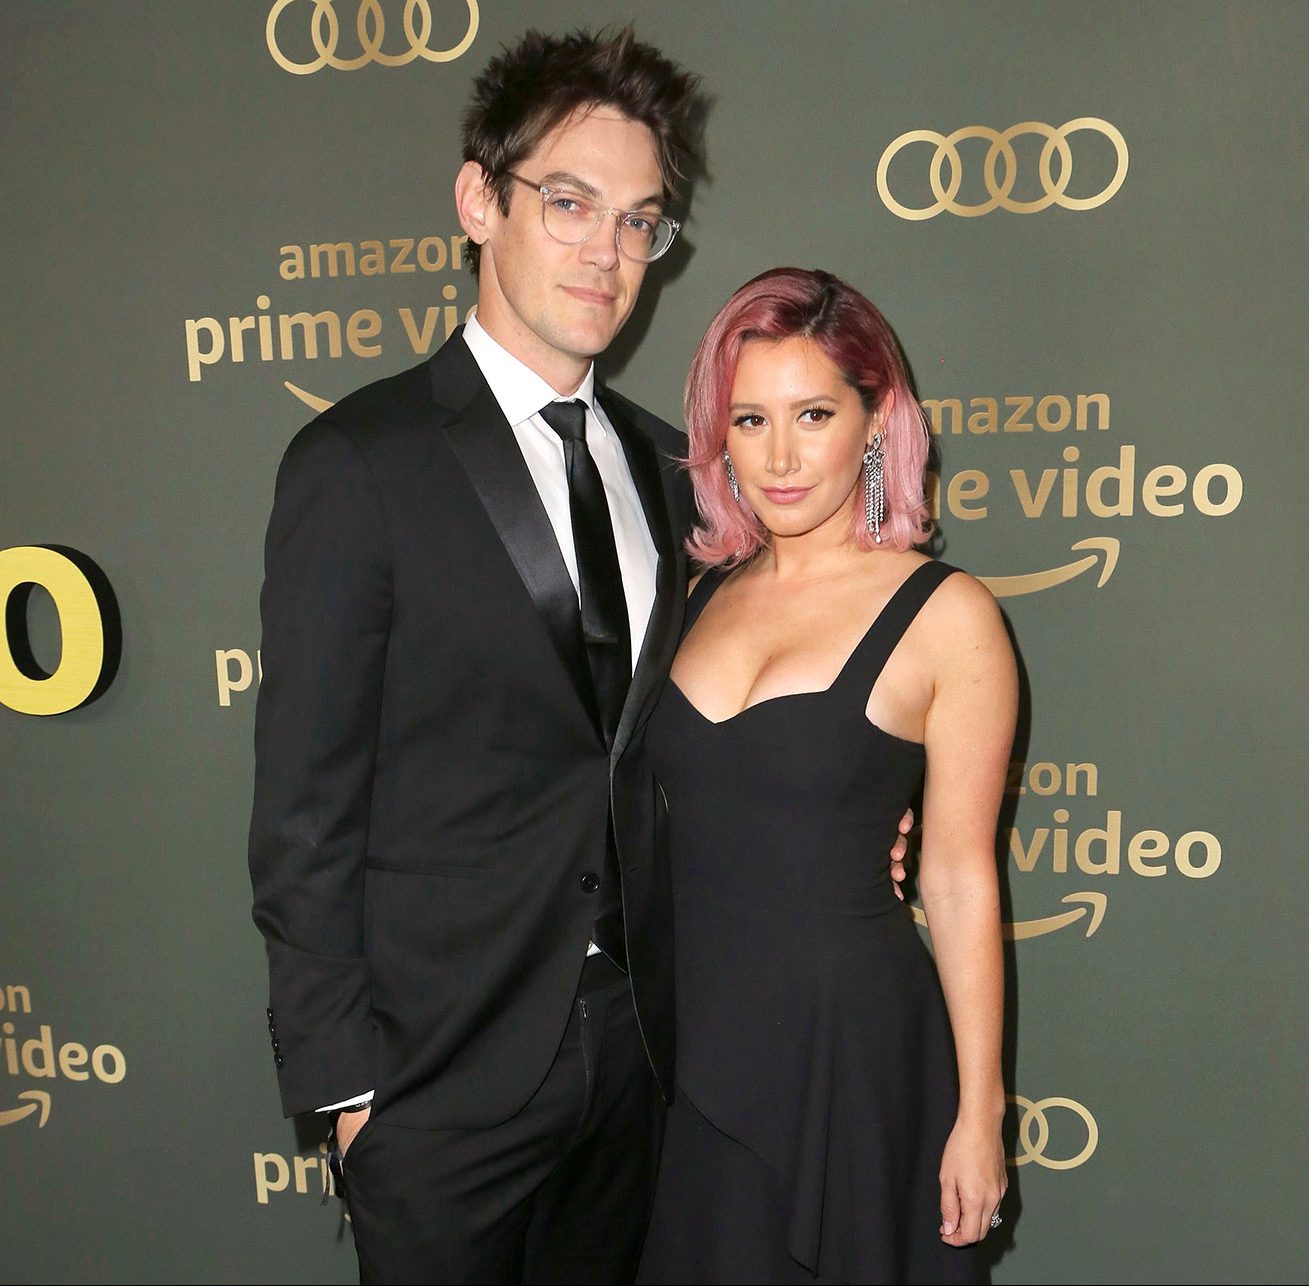 Ashley Tisdale Is Pregnant With Her, Christopher French's 1st Child